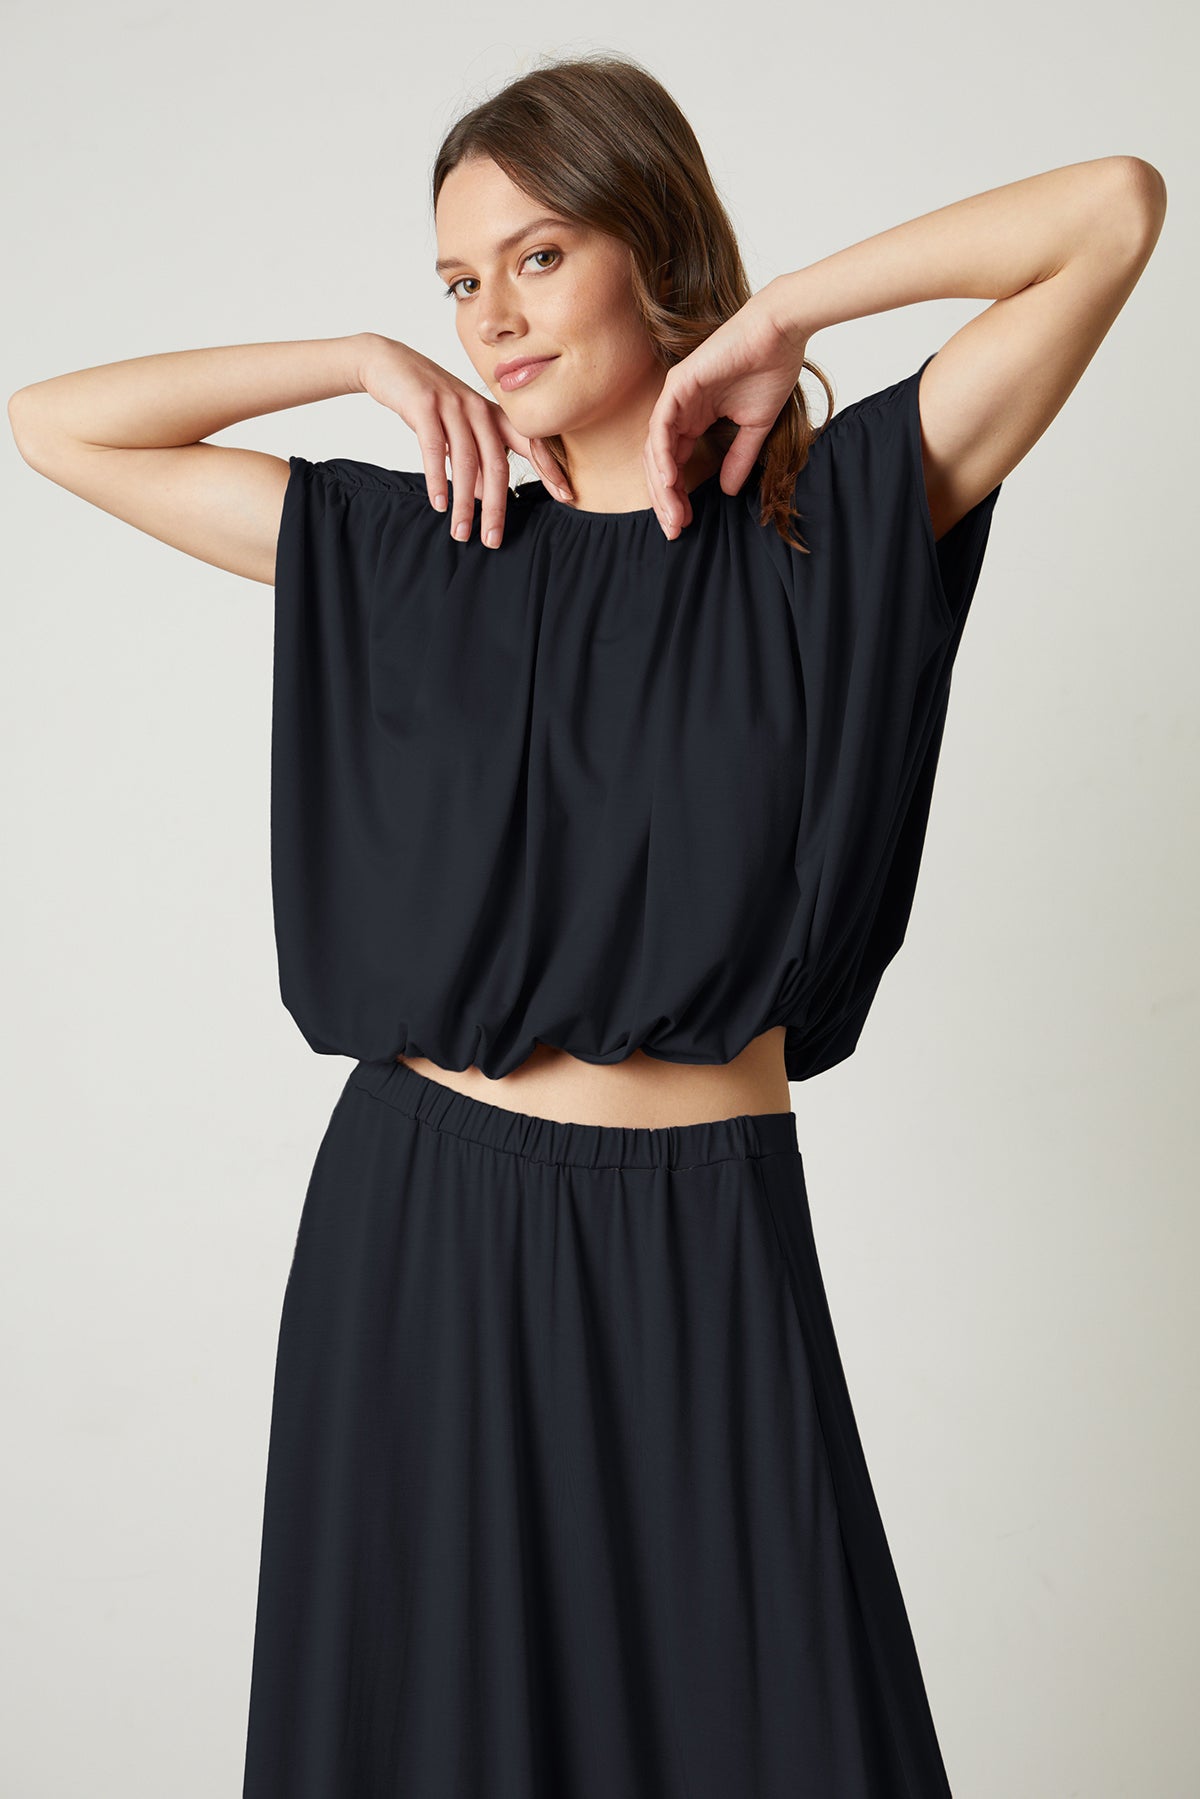   Model standing with arms up wearing Carmen Cocoon Drape Top in black with Malaya skirt in black. 